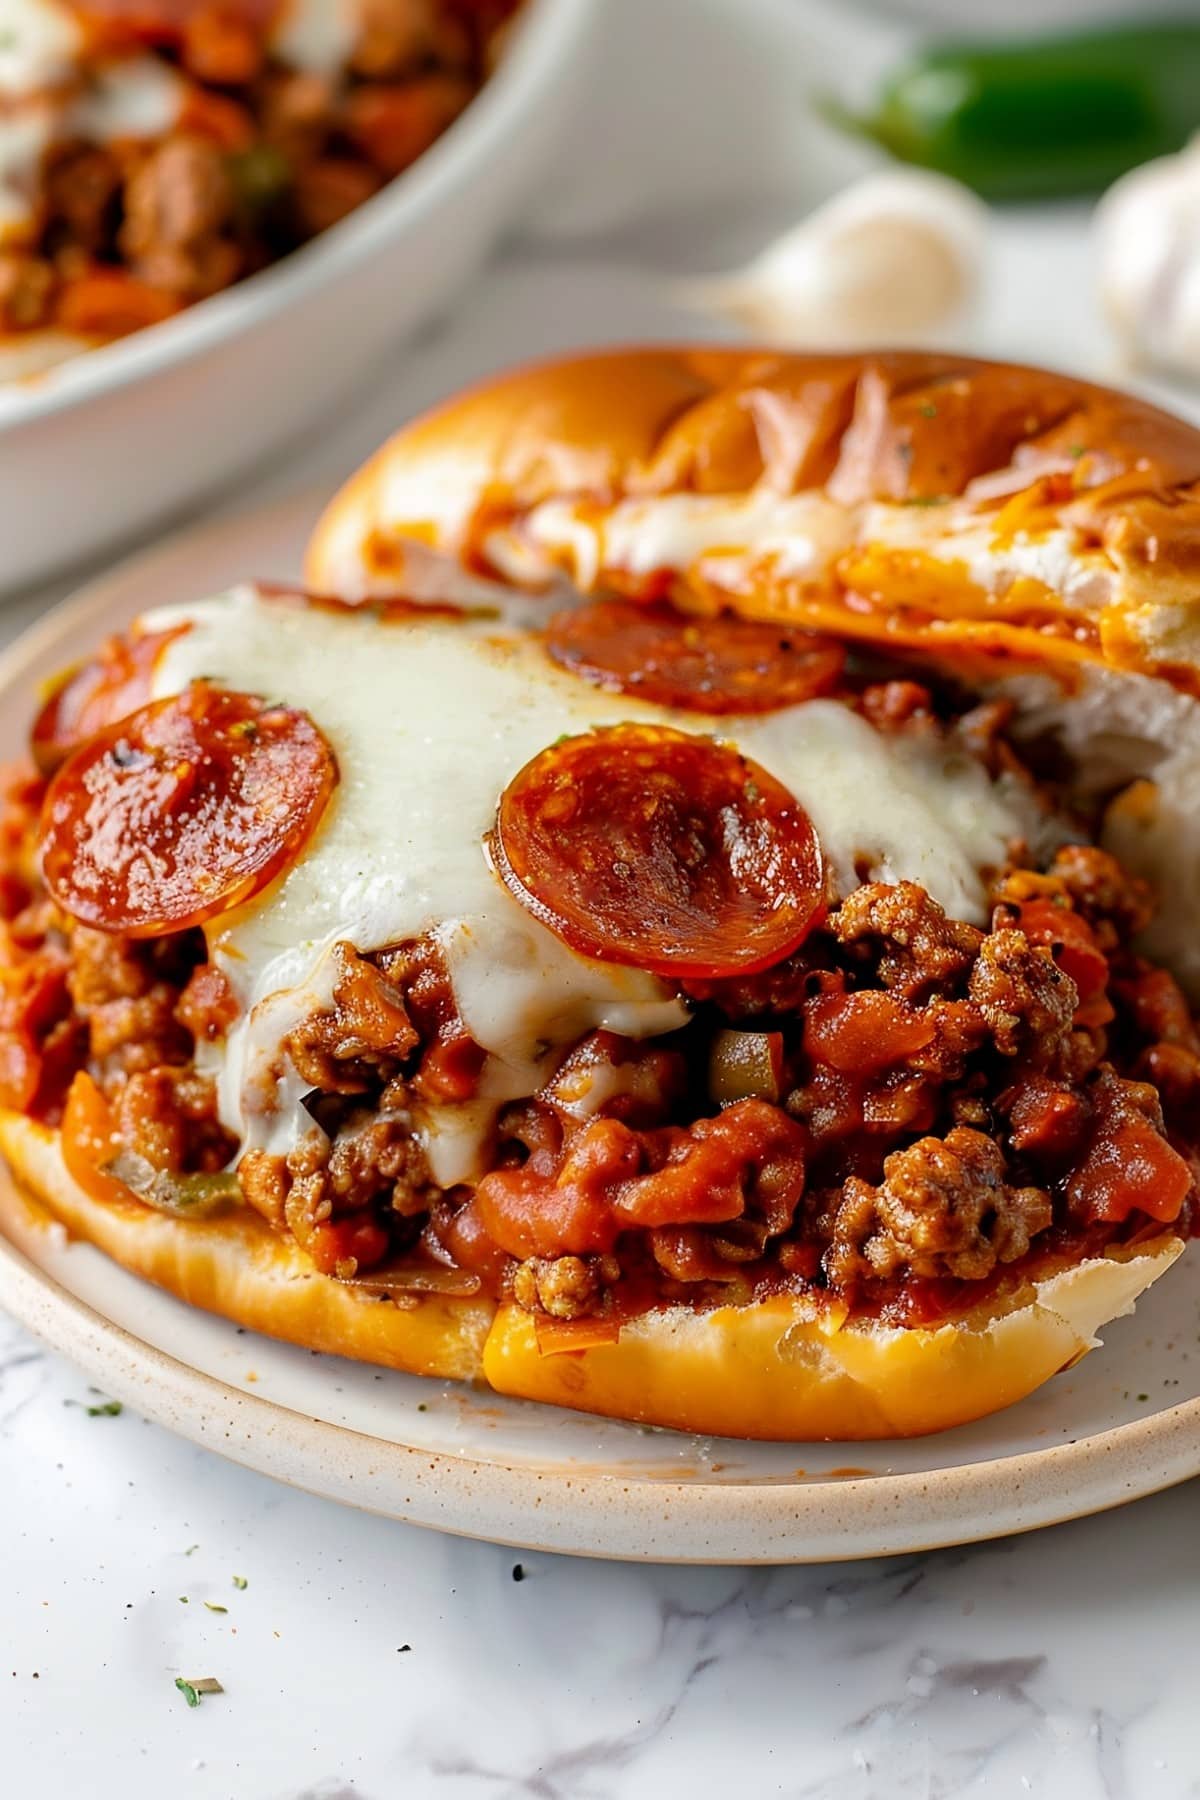 Deliciously messy pepperoni pizza sloppy joes with melted mozzarella cheese, Italian sausage and green bell peppers